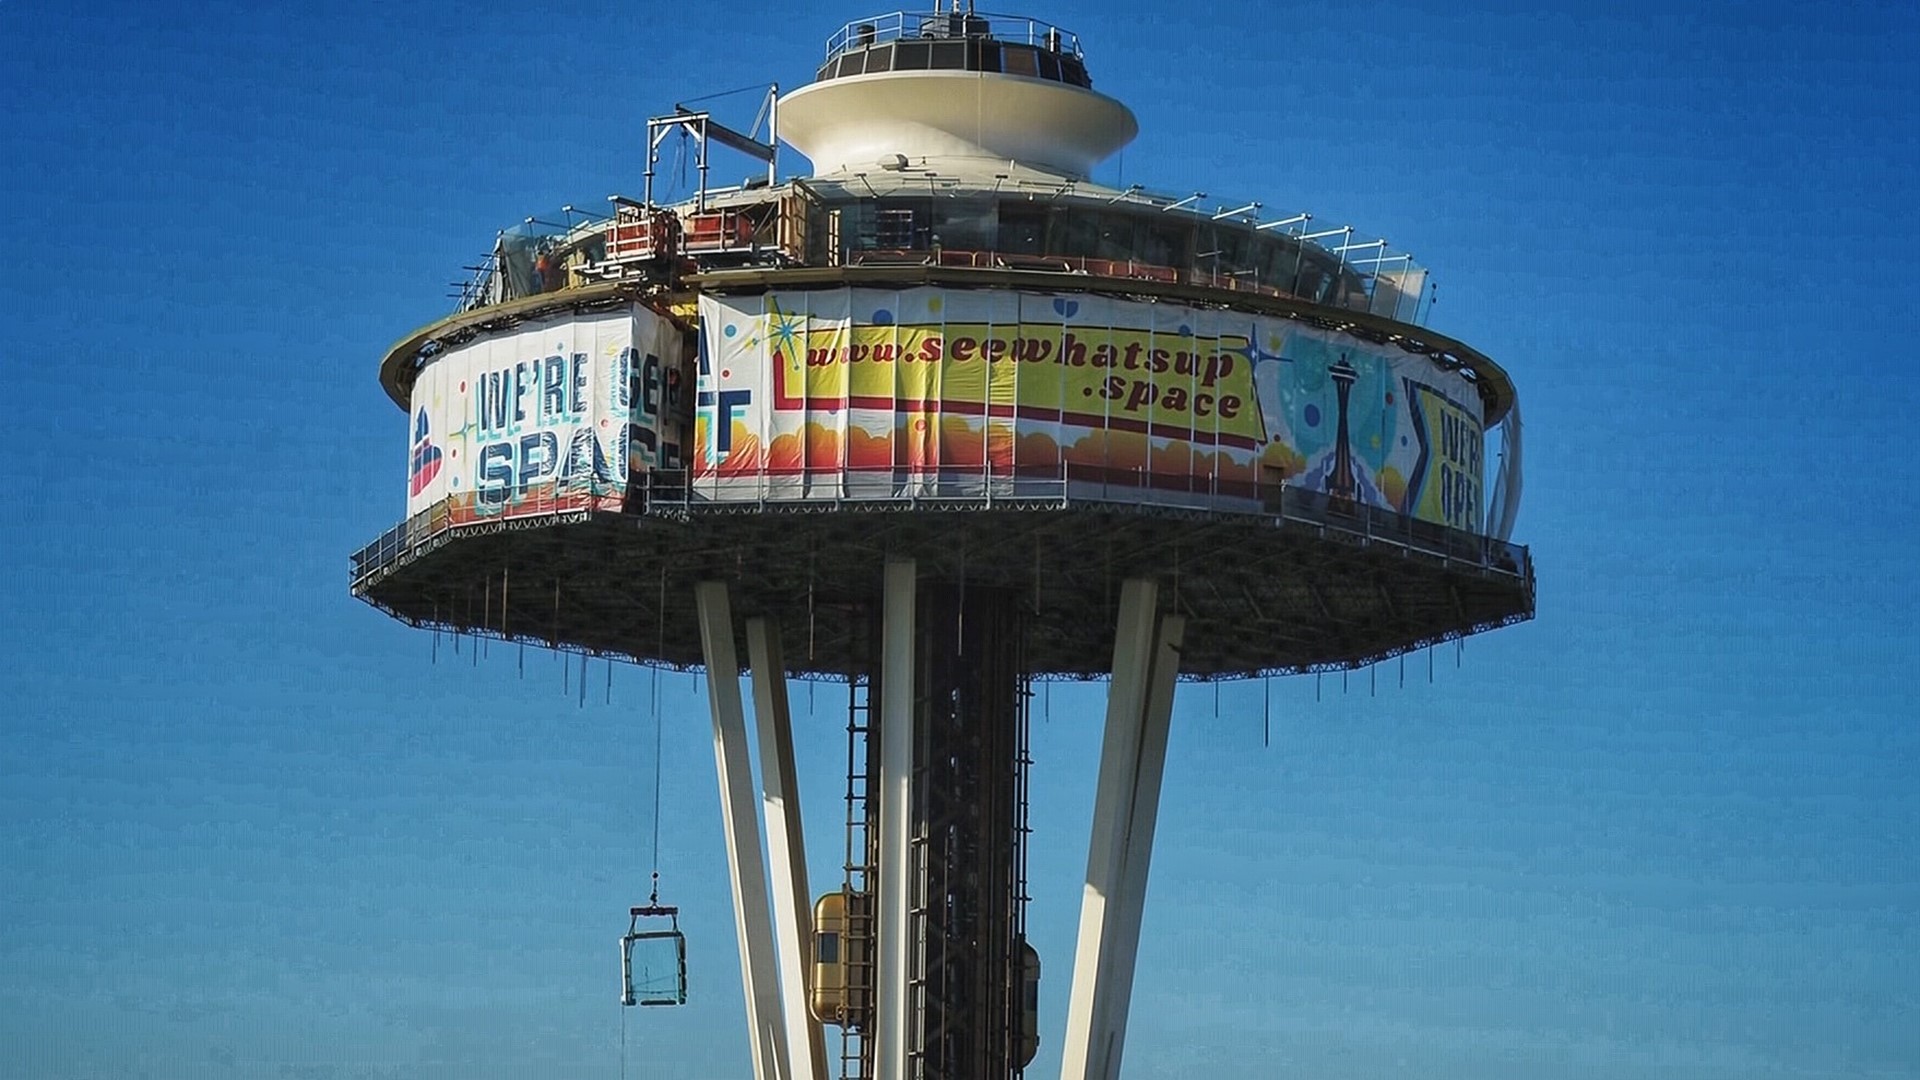 for what worlds fair was the space needle in seattle erected